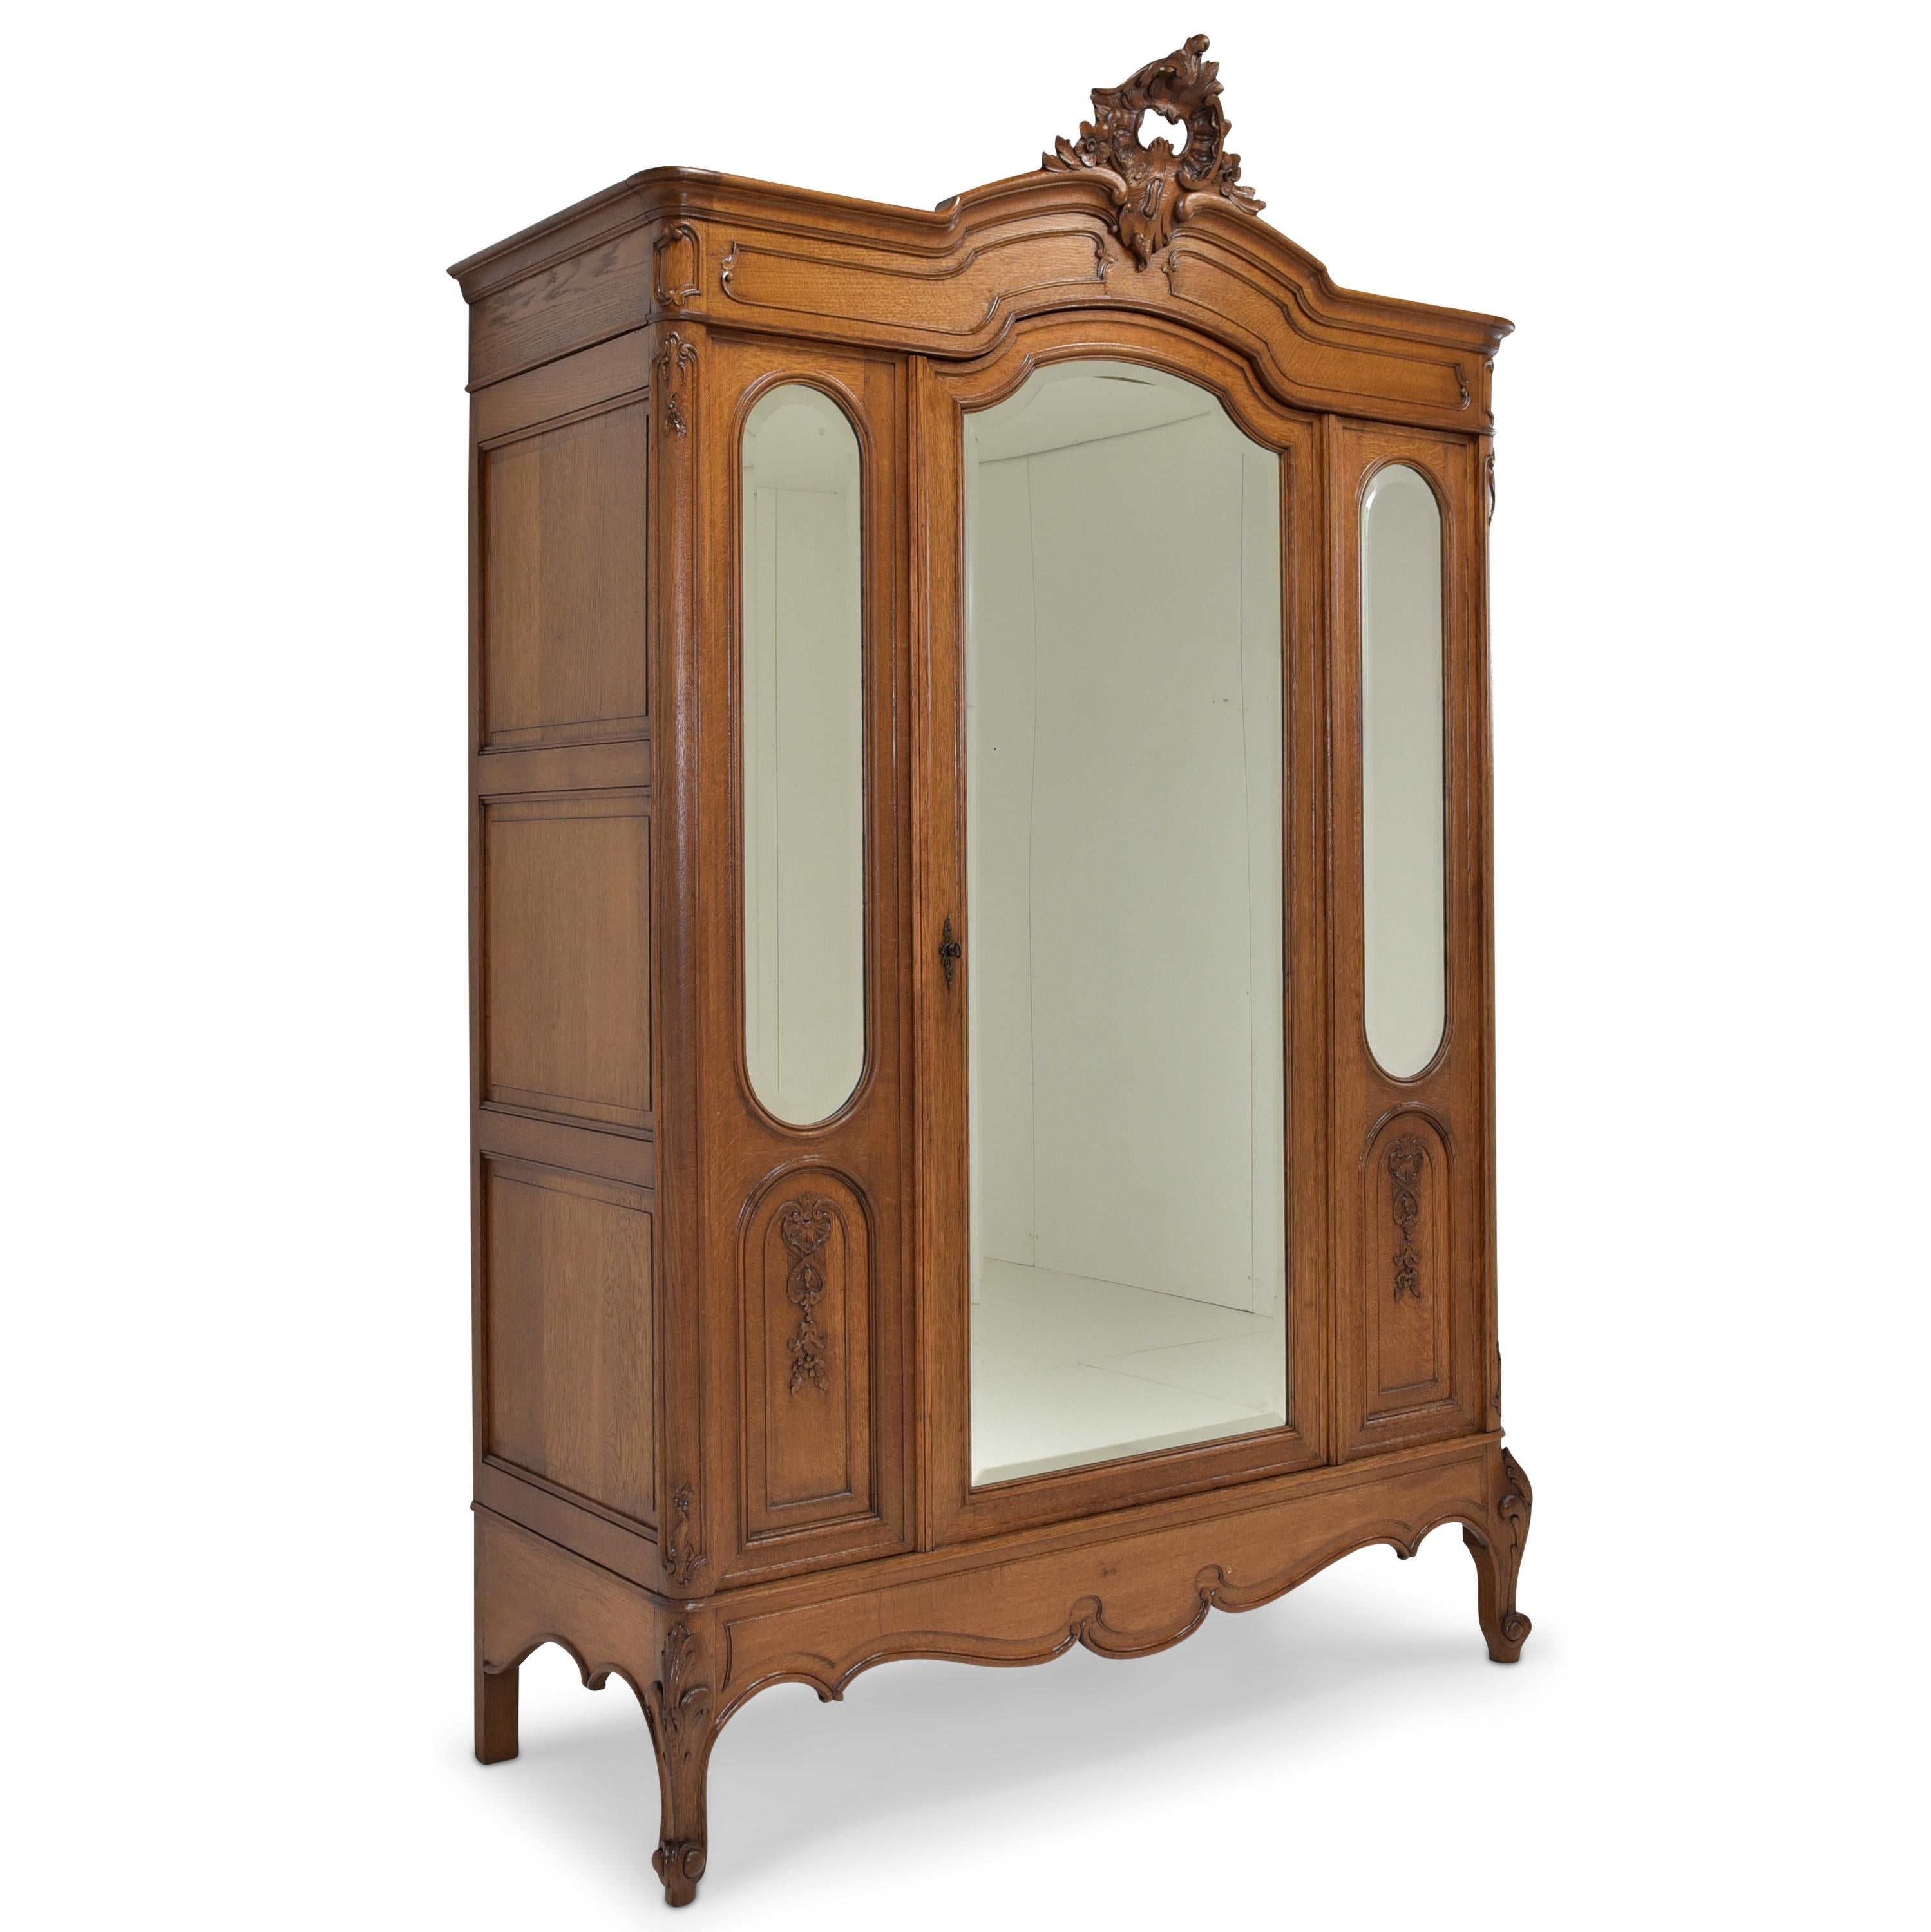 Large hall closet restored solid neo-baroque oak closet, 1925

Features:
Single-door model with mirrors and clothes rail
The outer door elements cannot be opened due to the construction
High quality
Cassette fillings
Original faceted